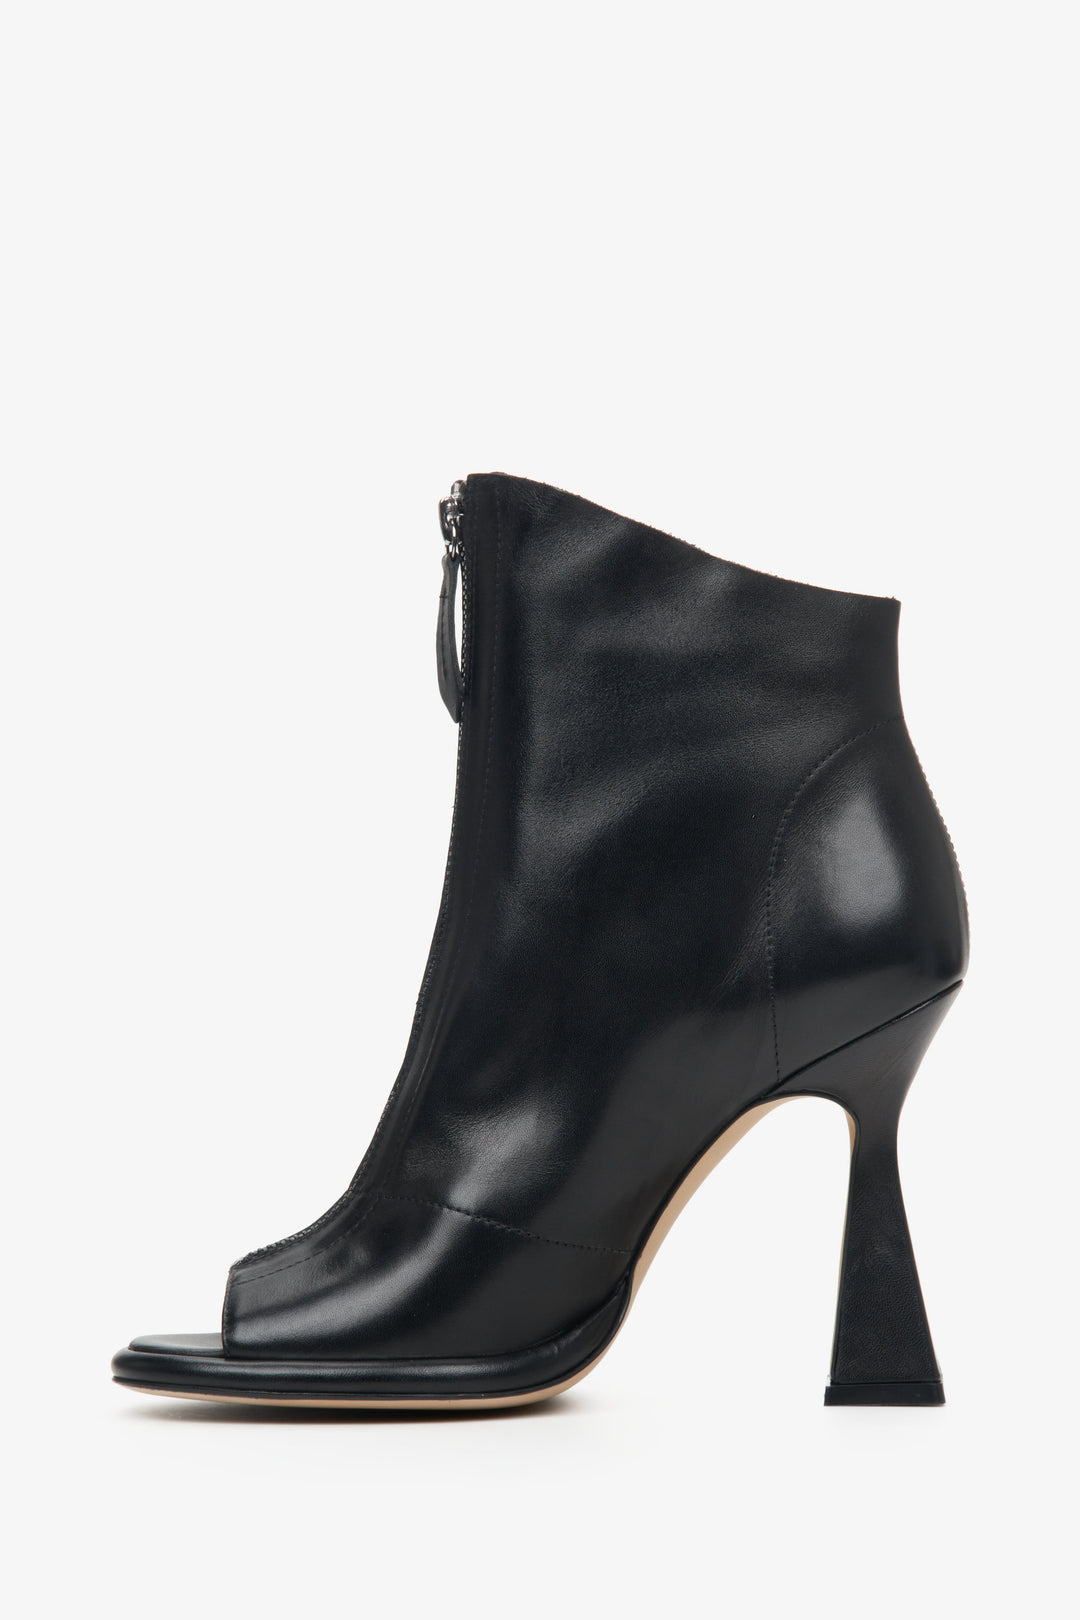 Black women's open toe ankle boots with a funnel heel made of natural leather Estro.